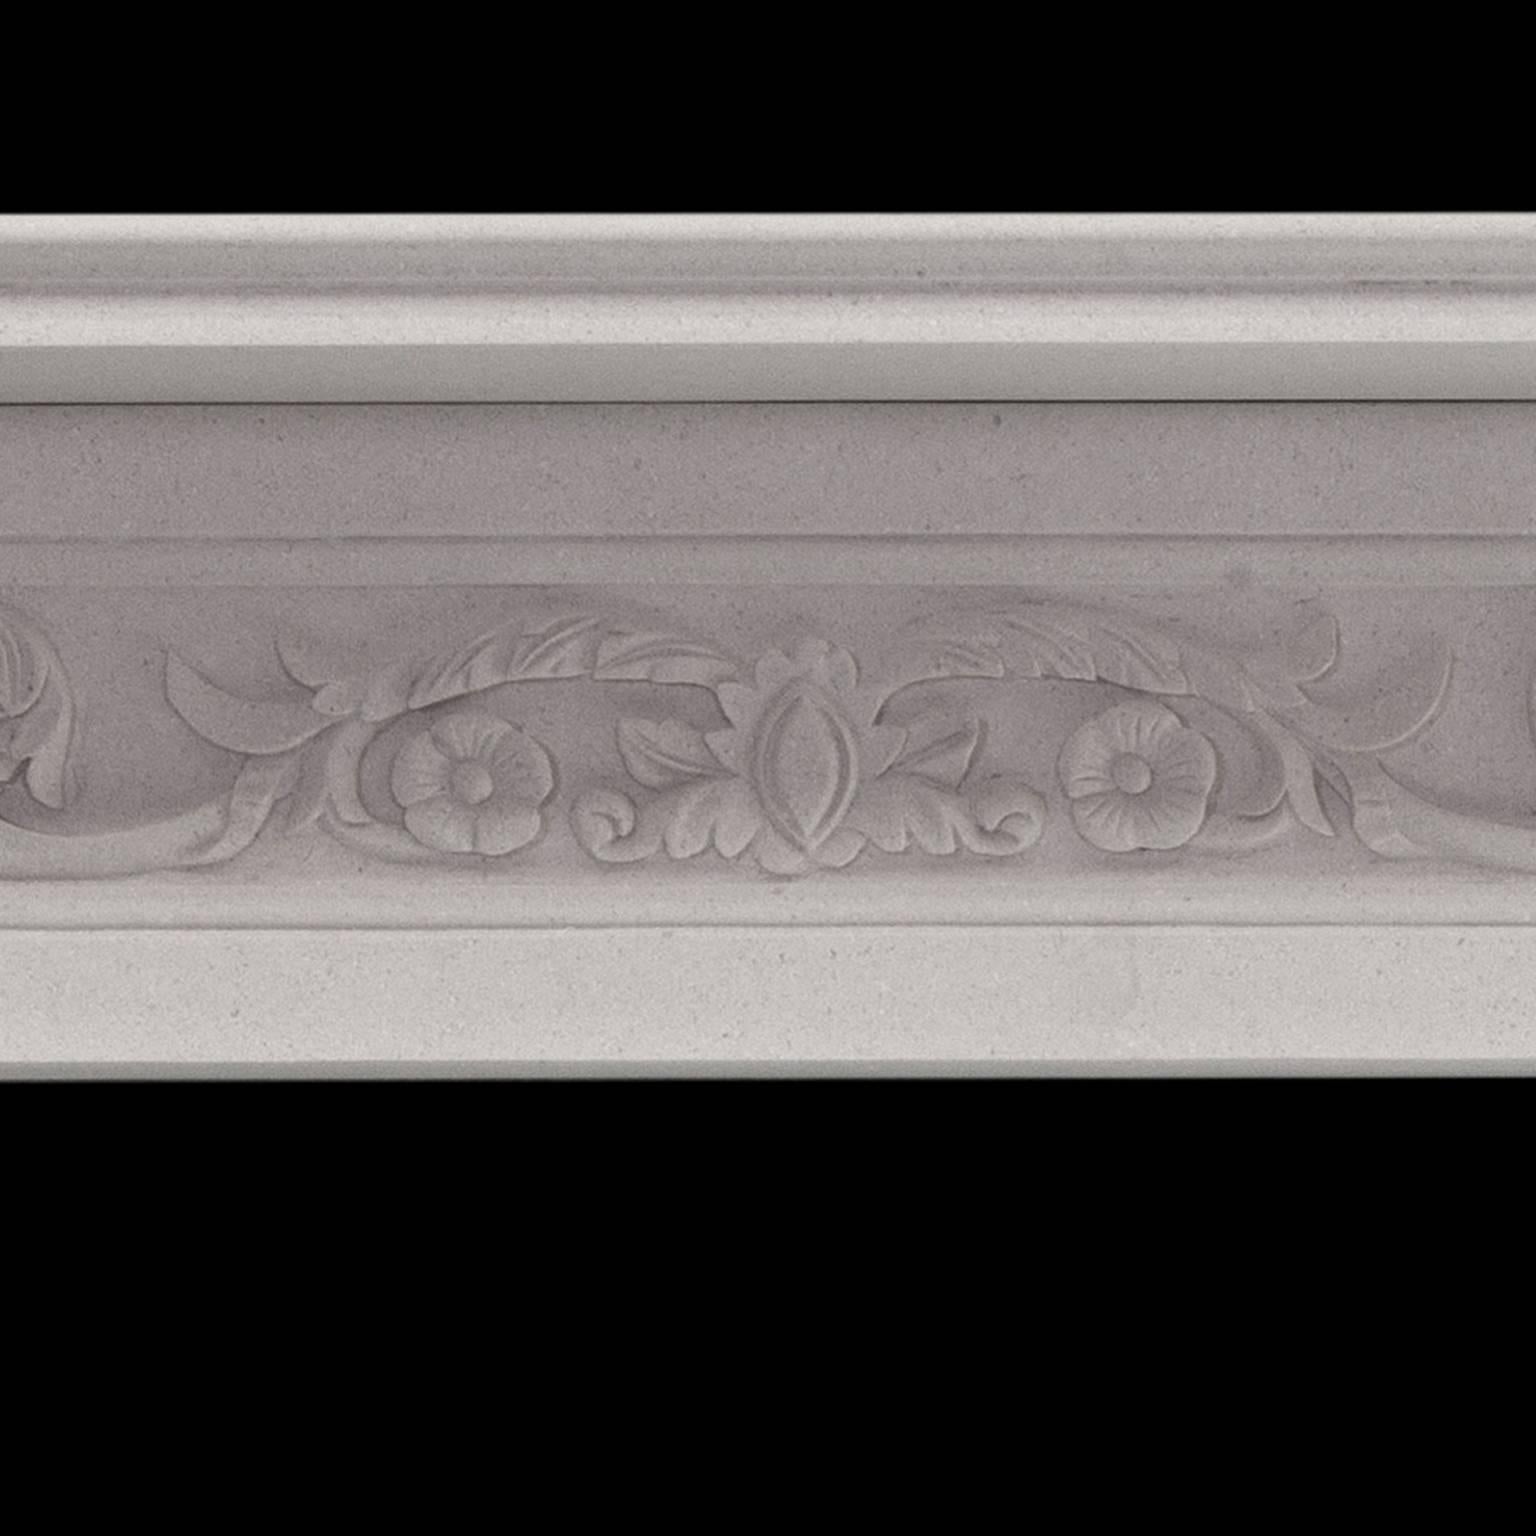 An impressive English made white Italian stone fireplace mantel.
Hand-carved corbels with detailed recessed panels on jambs and frieze.